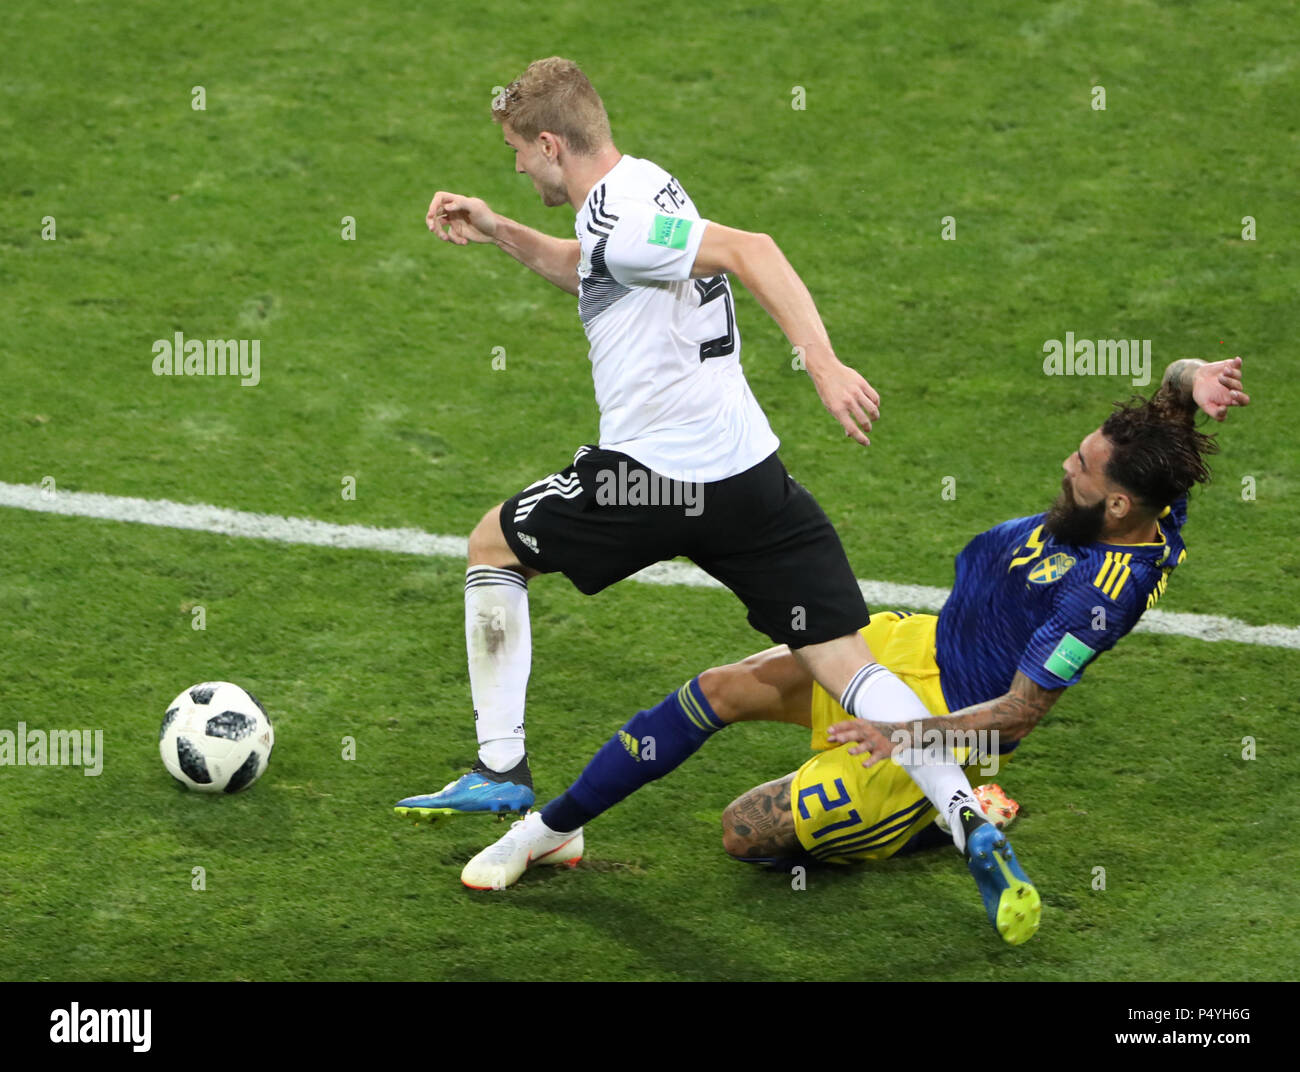 Sochi, Russia. 23rd June, 2018. Timo Werner (L) of Germany vies with Jimmy Durmaz of Sweden during the 2018 FIFA World Cup Group F match between Germany and Sweden in Sochi, Russia, June 23, 2018. Germany won 2-1. Credit: Ye Pingfan/Xinhua/Alamy Live News Stock Photo